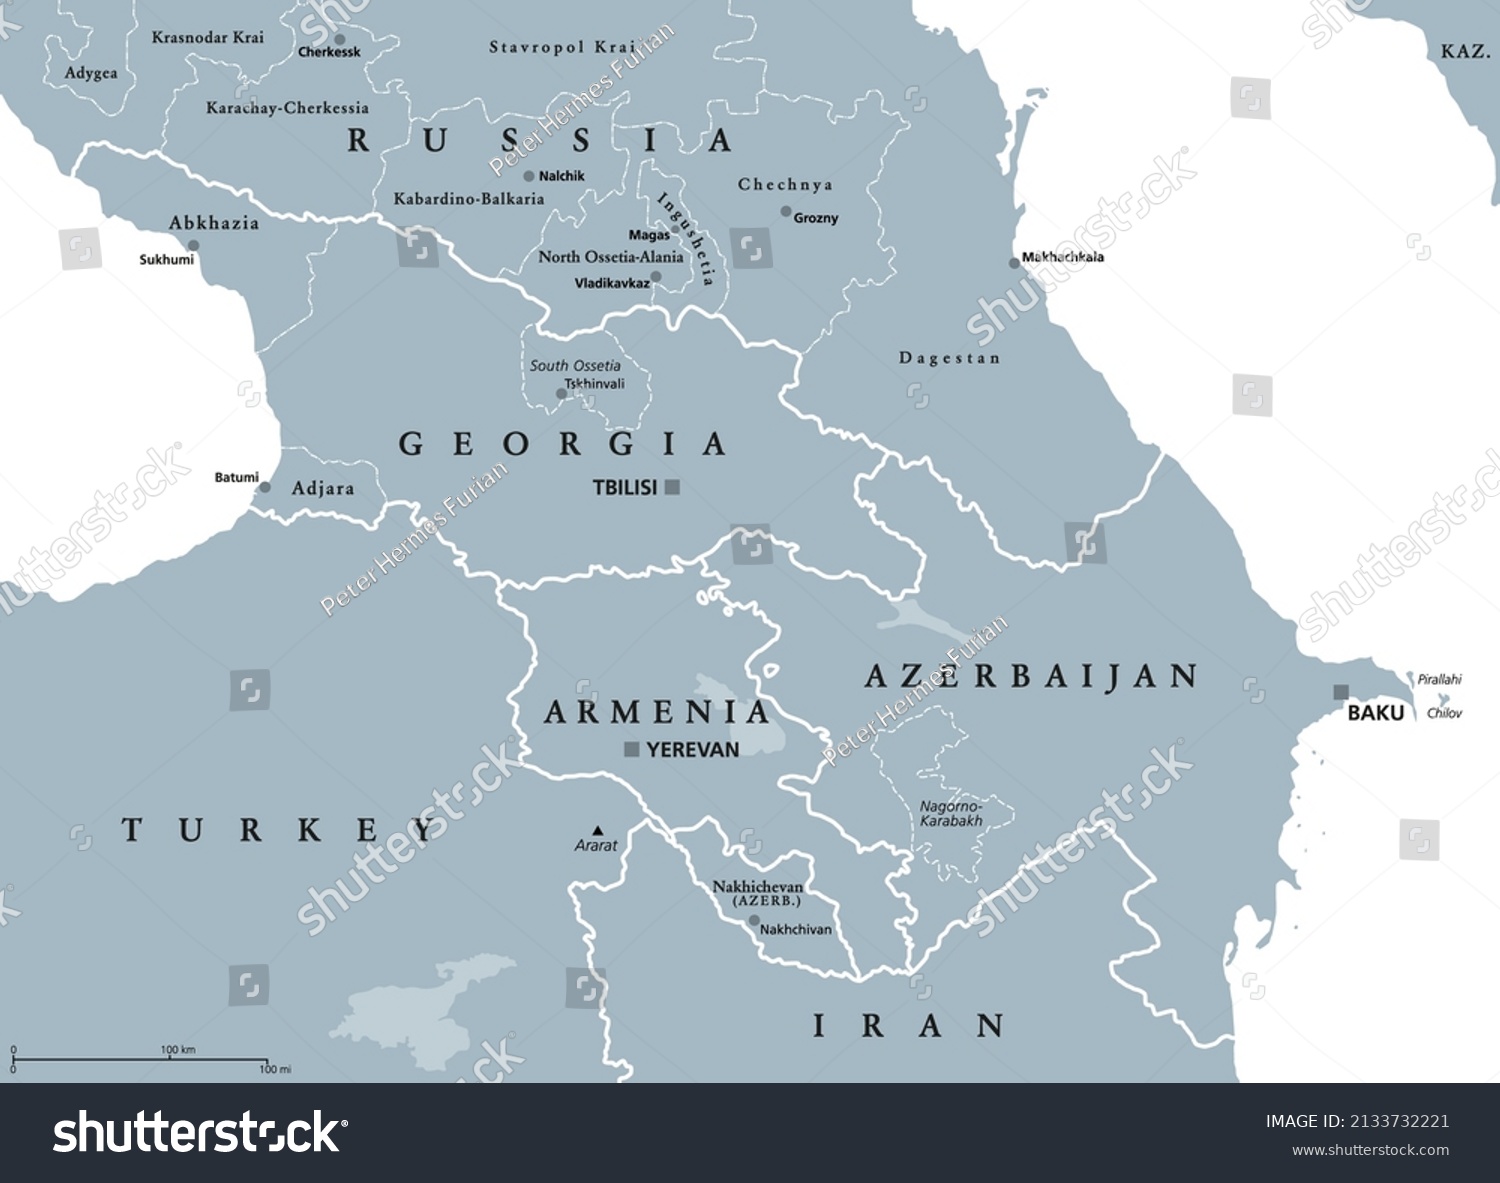 SVG of The Caucasus, or Caucasia, gray political map. Region between the Black Sea and the Caspian Sea, mainly occupied by Armenia, Azerbaijan, Georgia, and parts of Southern Russia. Map with disputed areas. svg